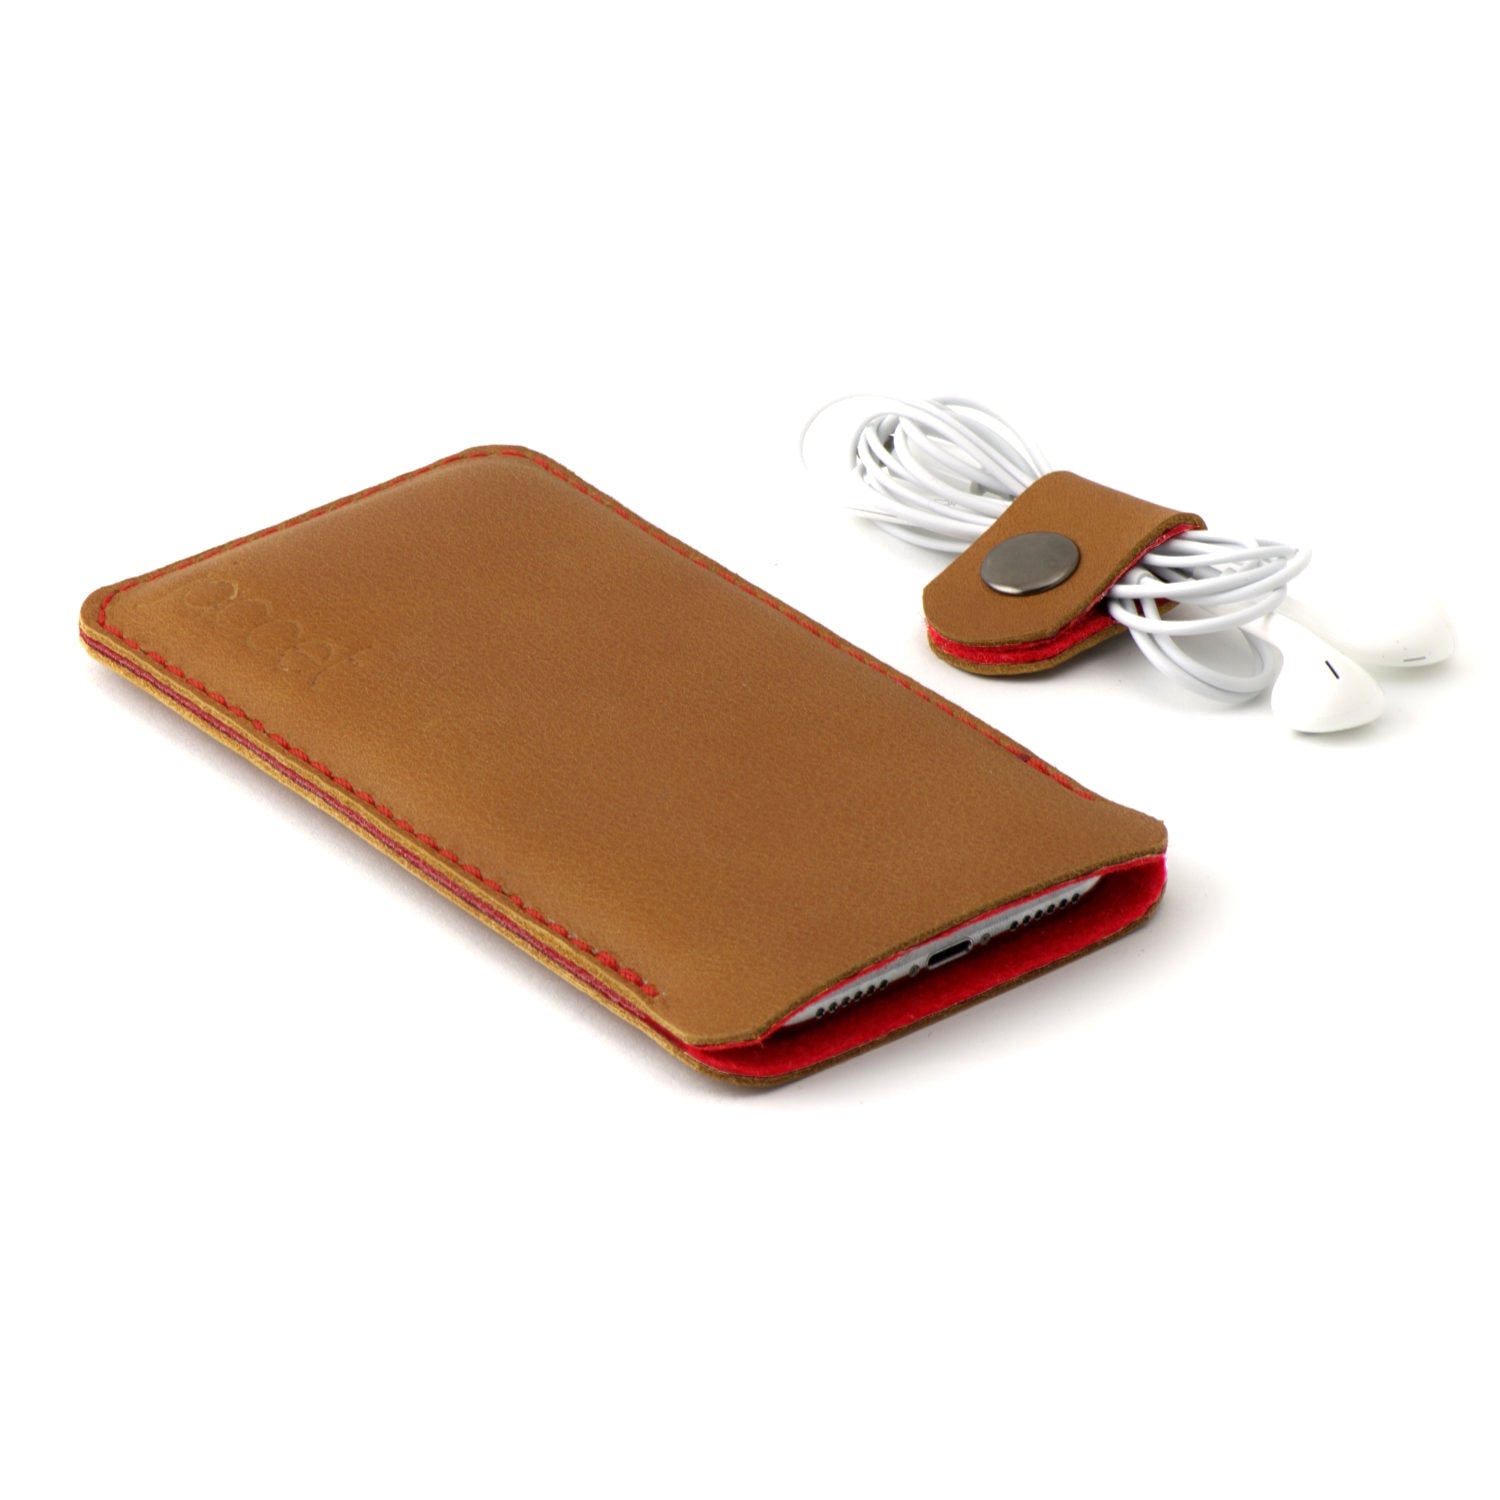 JACCET leather OPPO sleeve - Cognac color leather with red wool felt - 100% Handmade